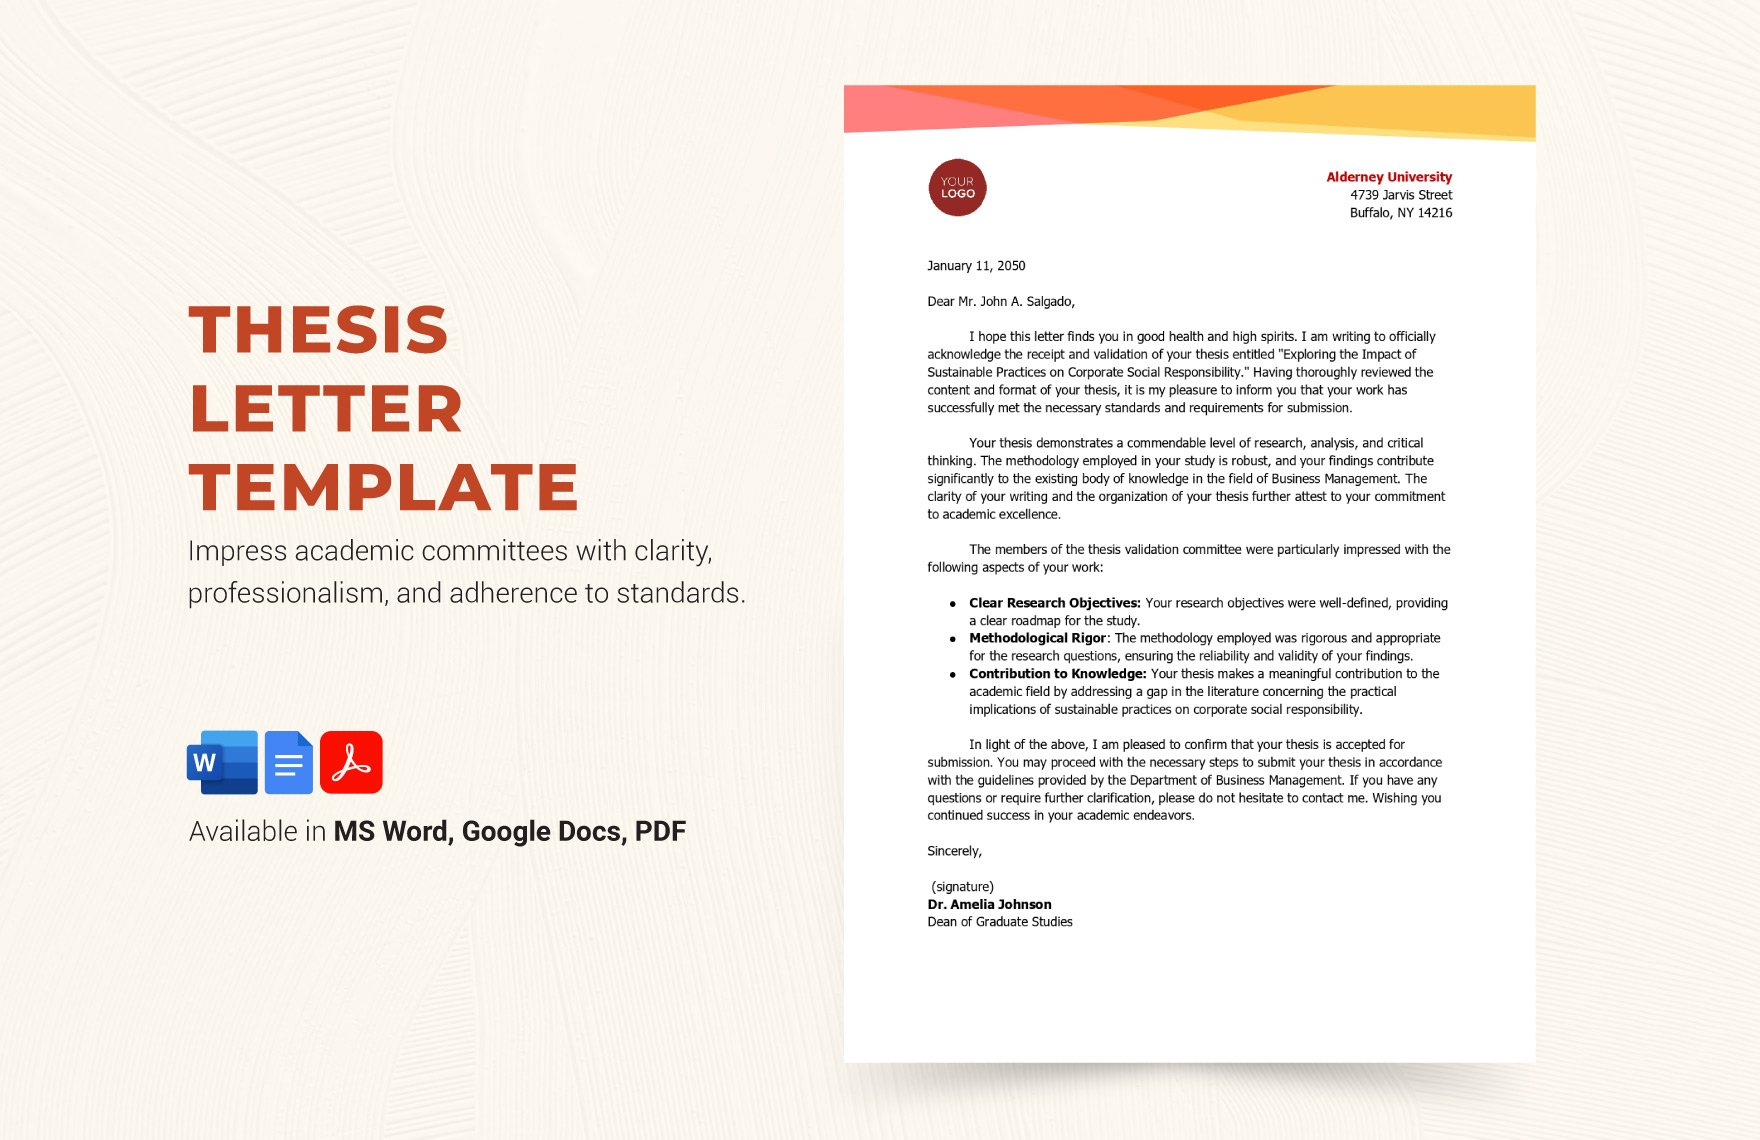 Thesis Letter Template